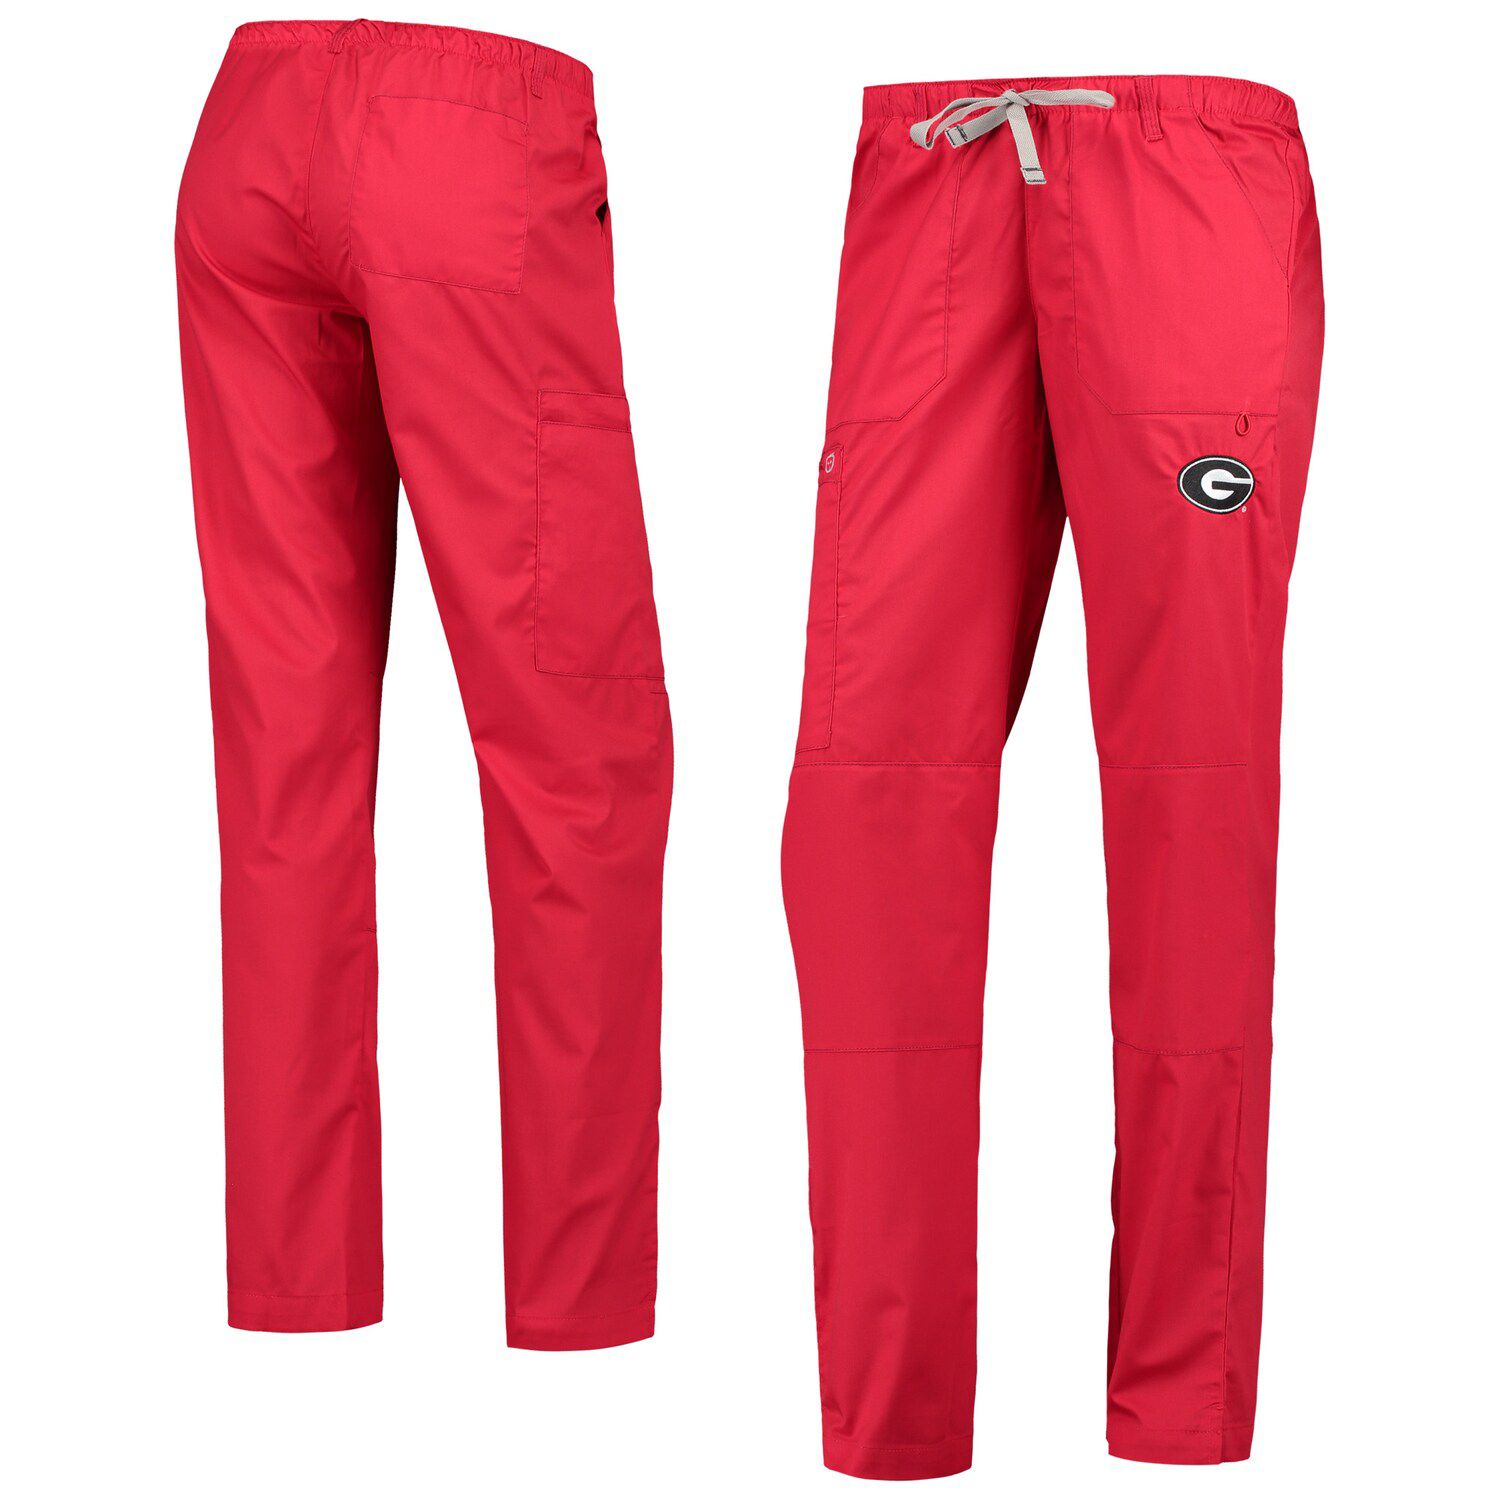 red cargo pants for women